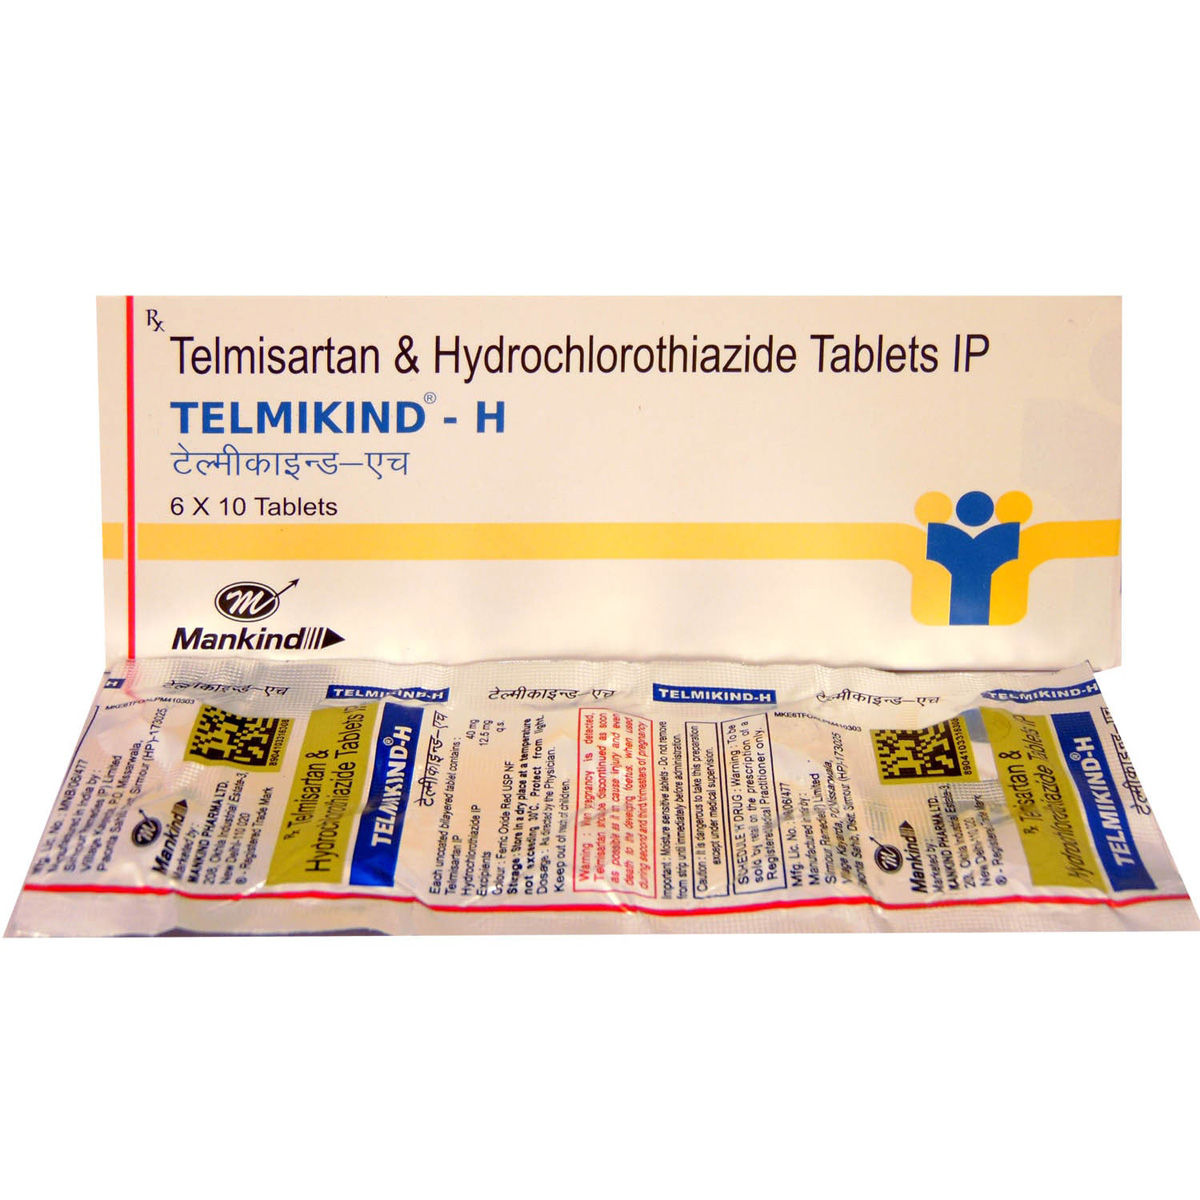 Telmikind-H Tablet, Uses, Side Effects, Price